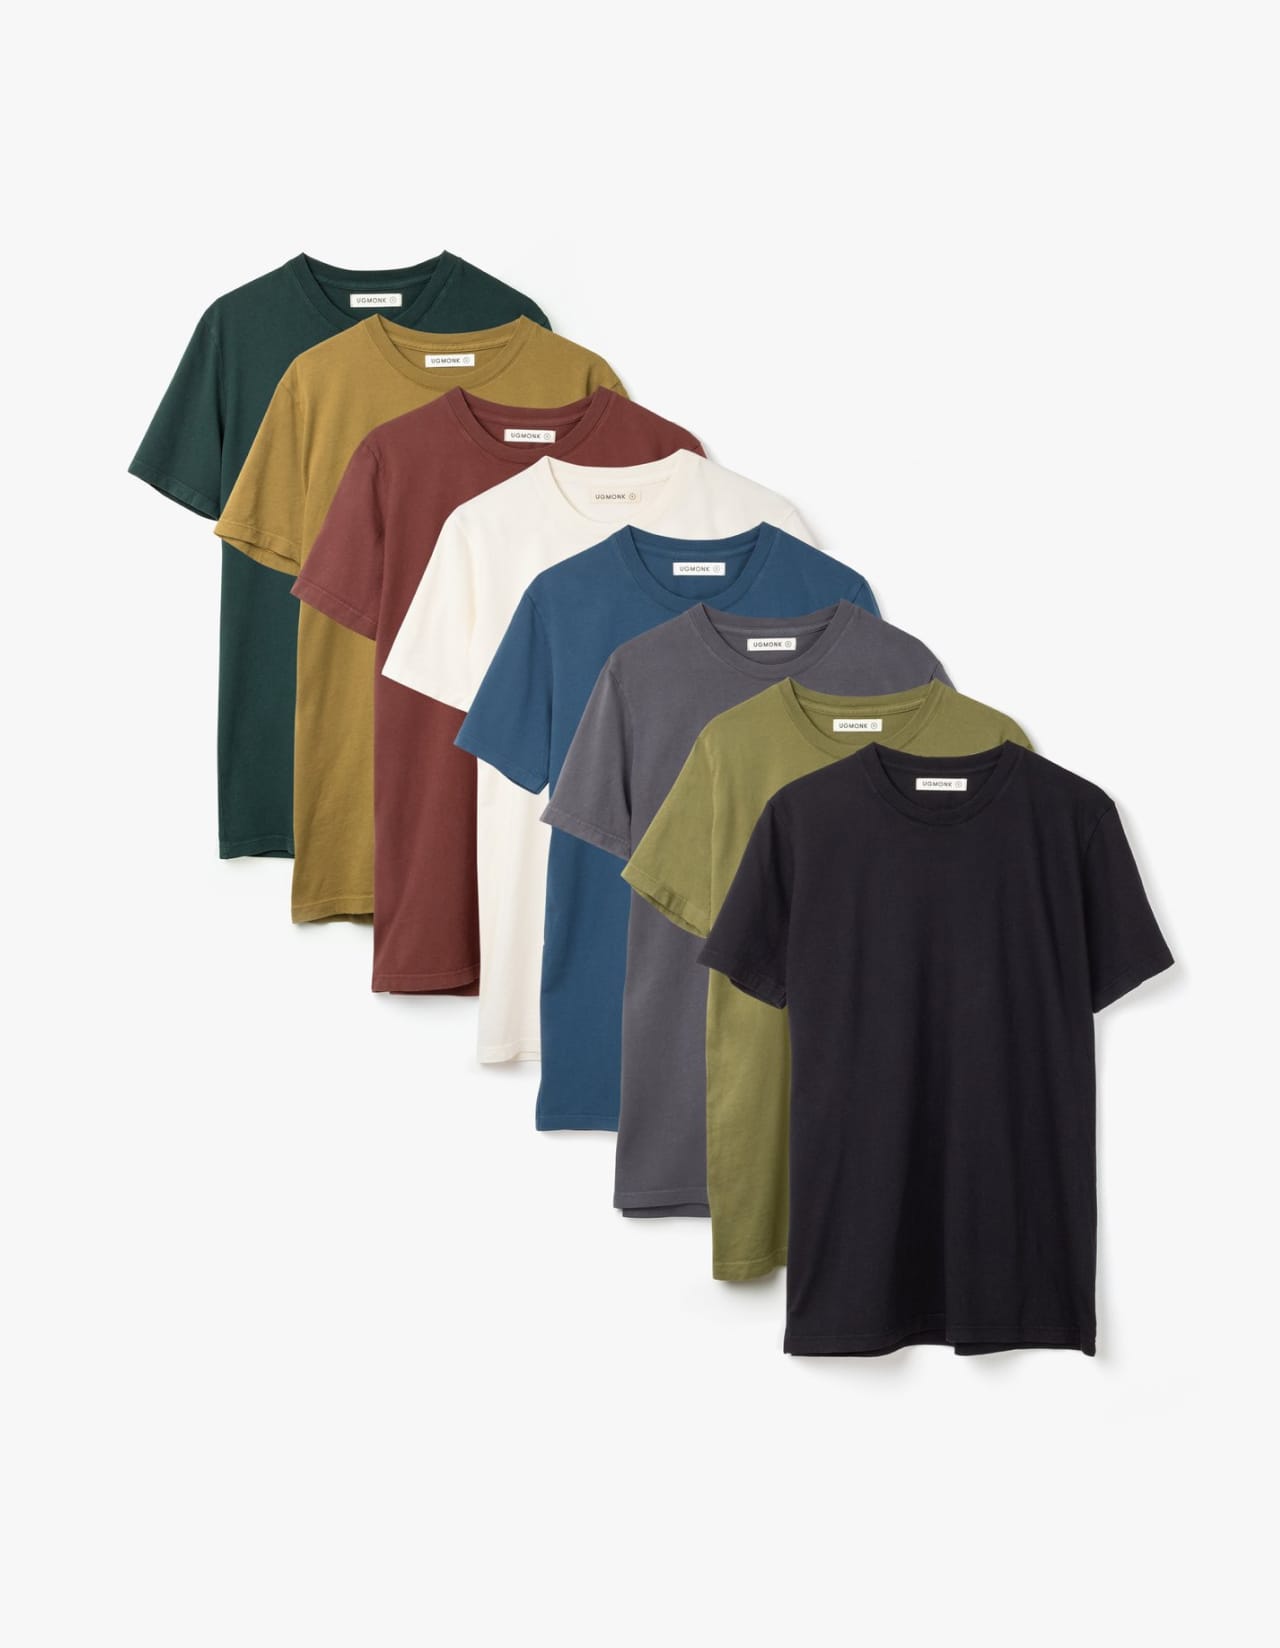 Eight shirts arranged on table in black, olive, grey, blue, white, red, mustard, and green.